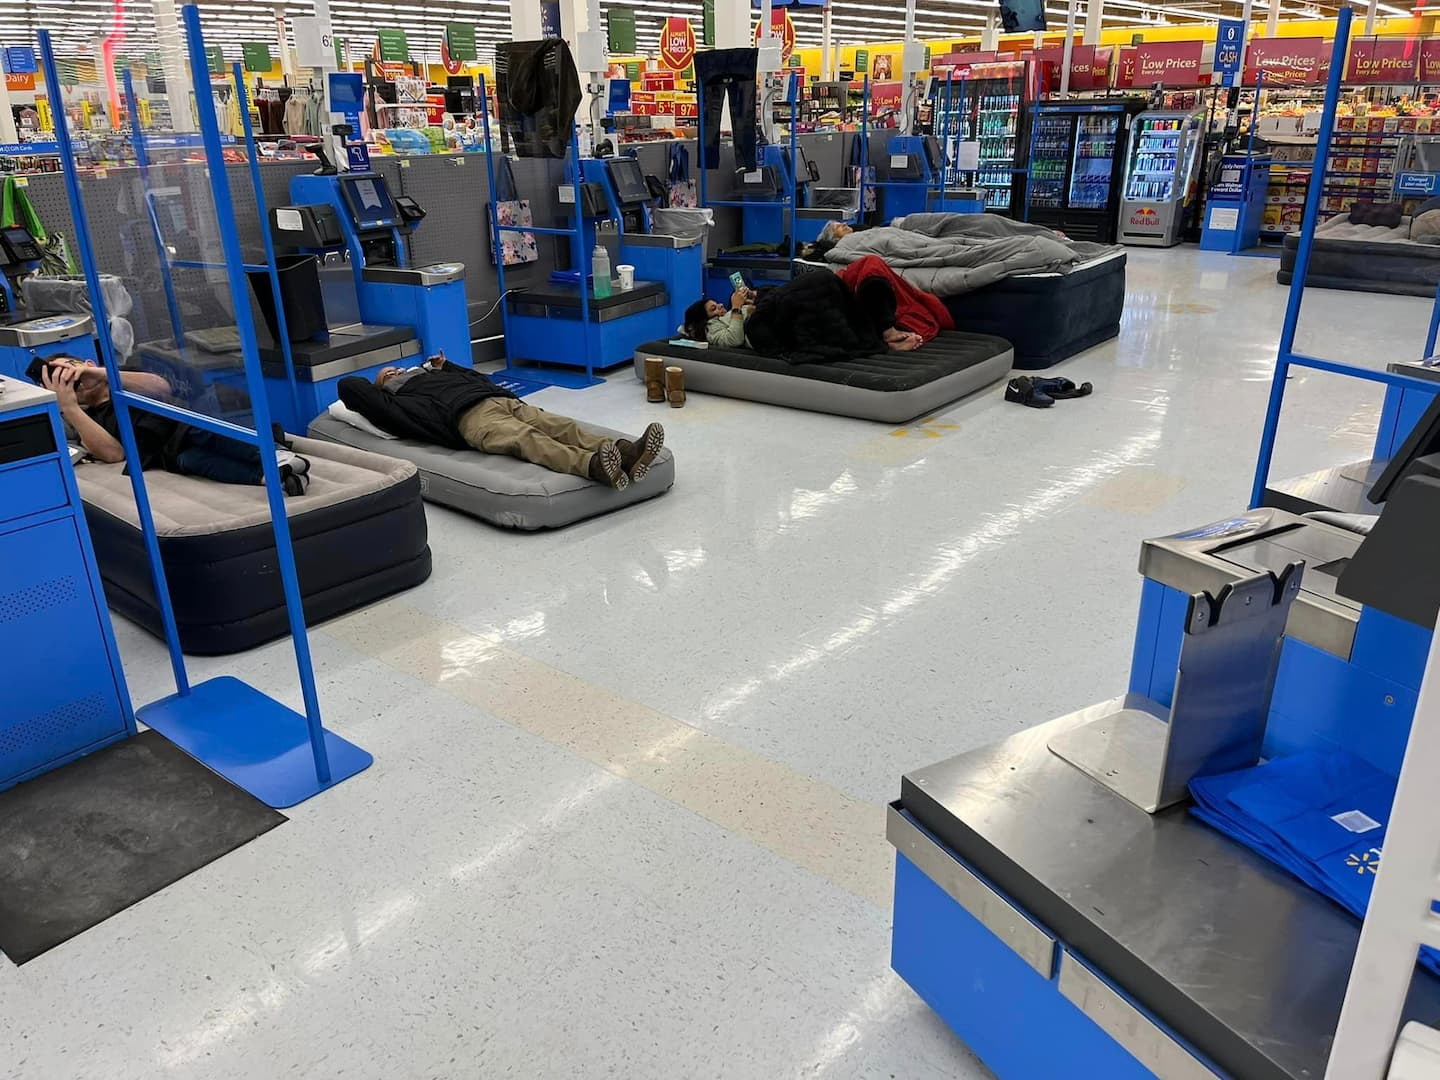 Forced to sleep at Walmart because of the storm